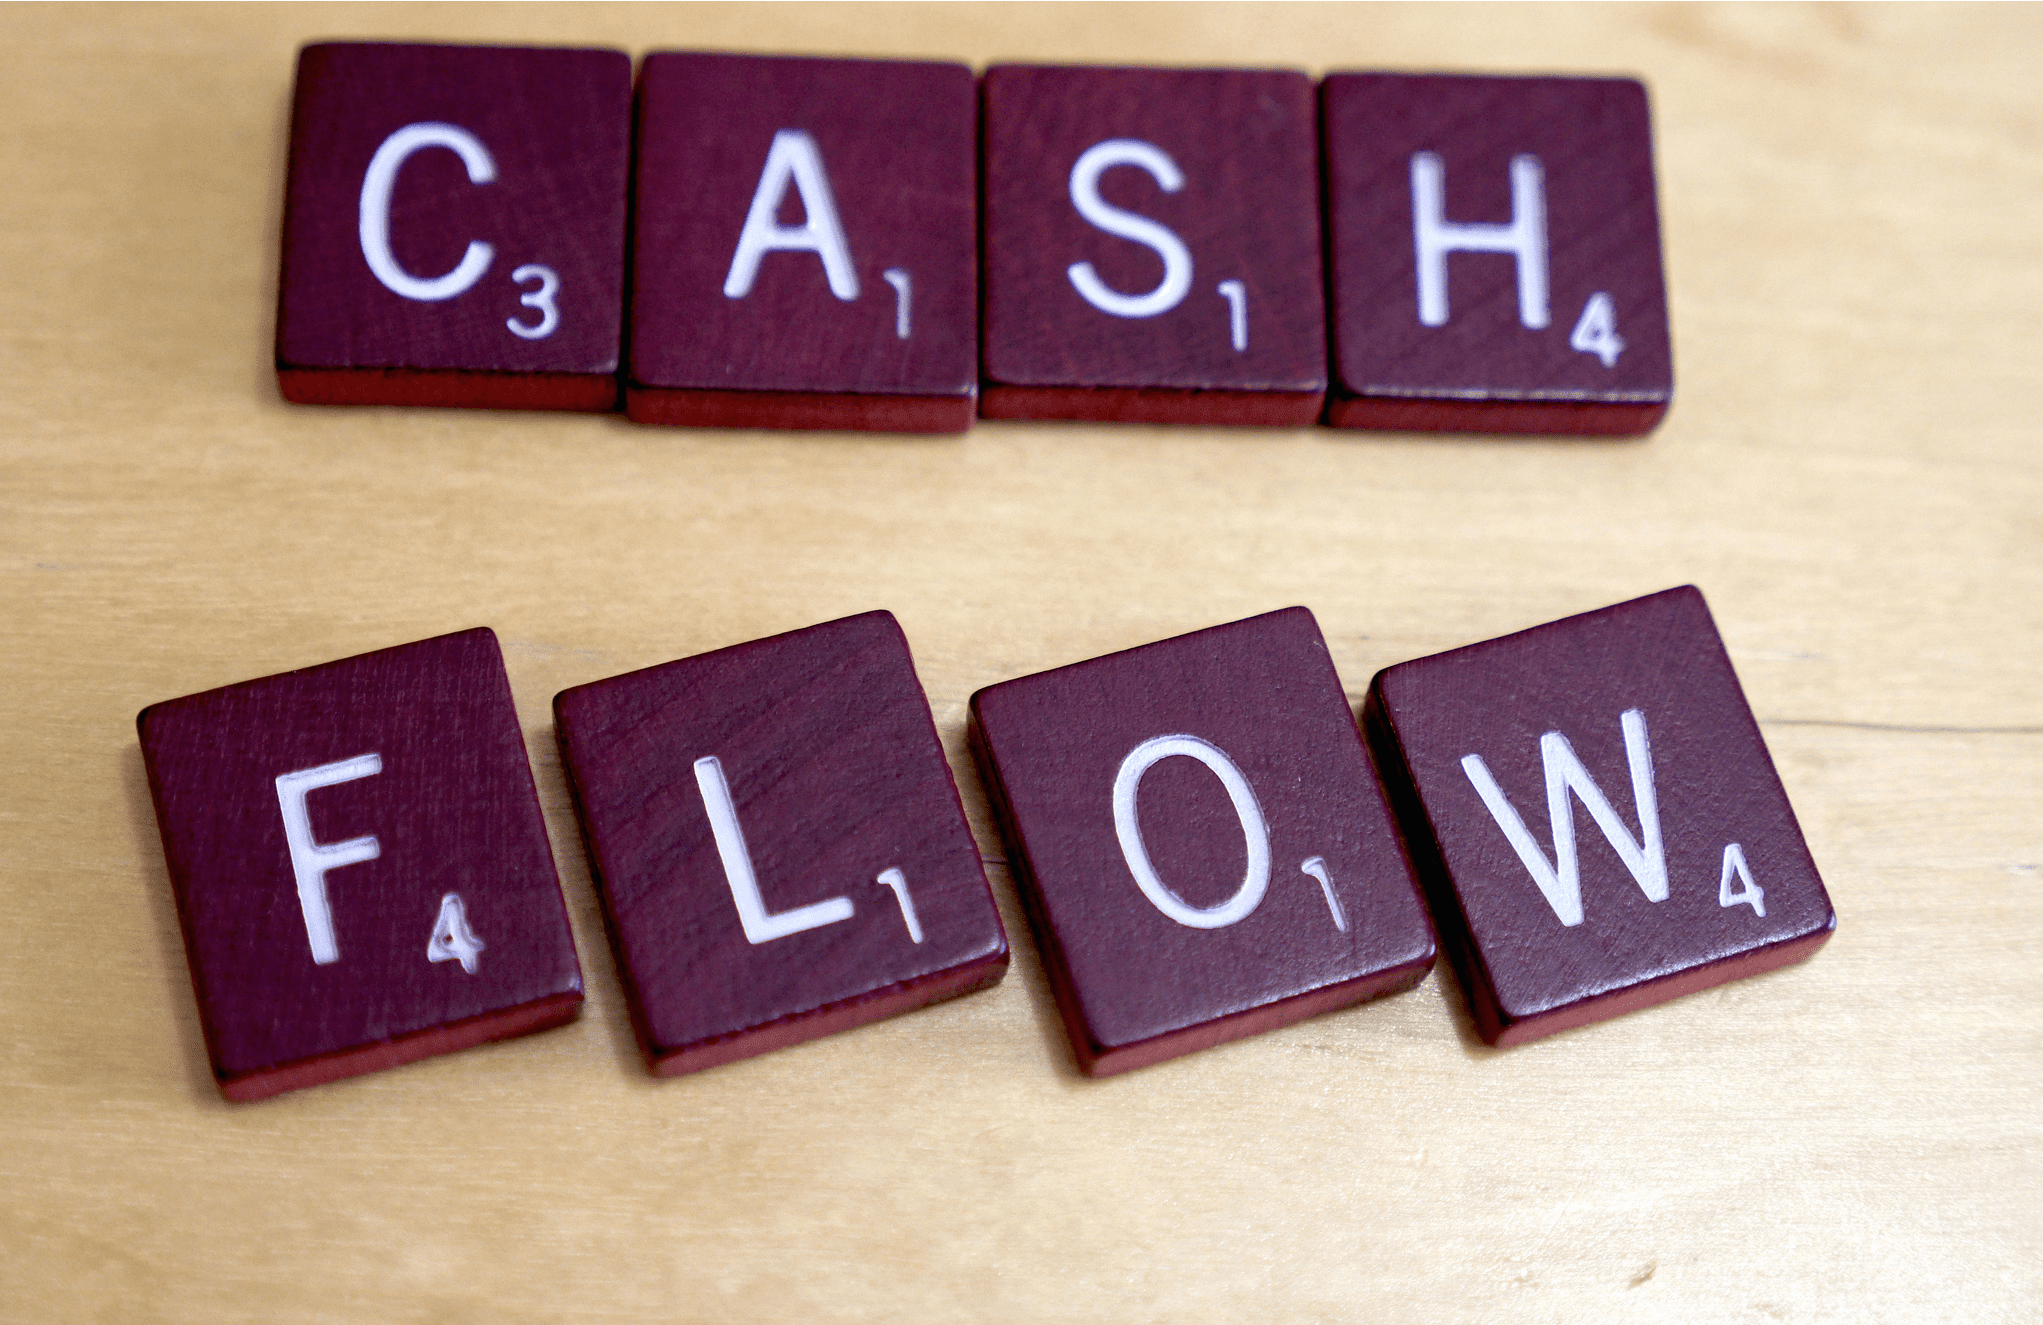 How To Value Stock Step 4: Discounted Cash Flow (DCF)